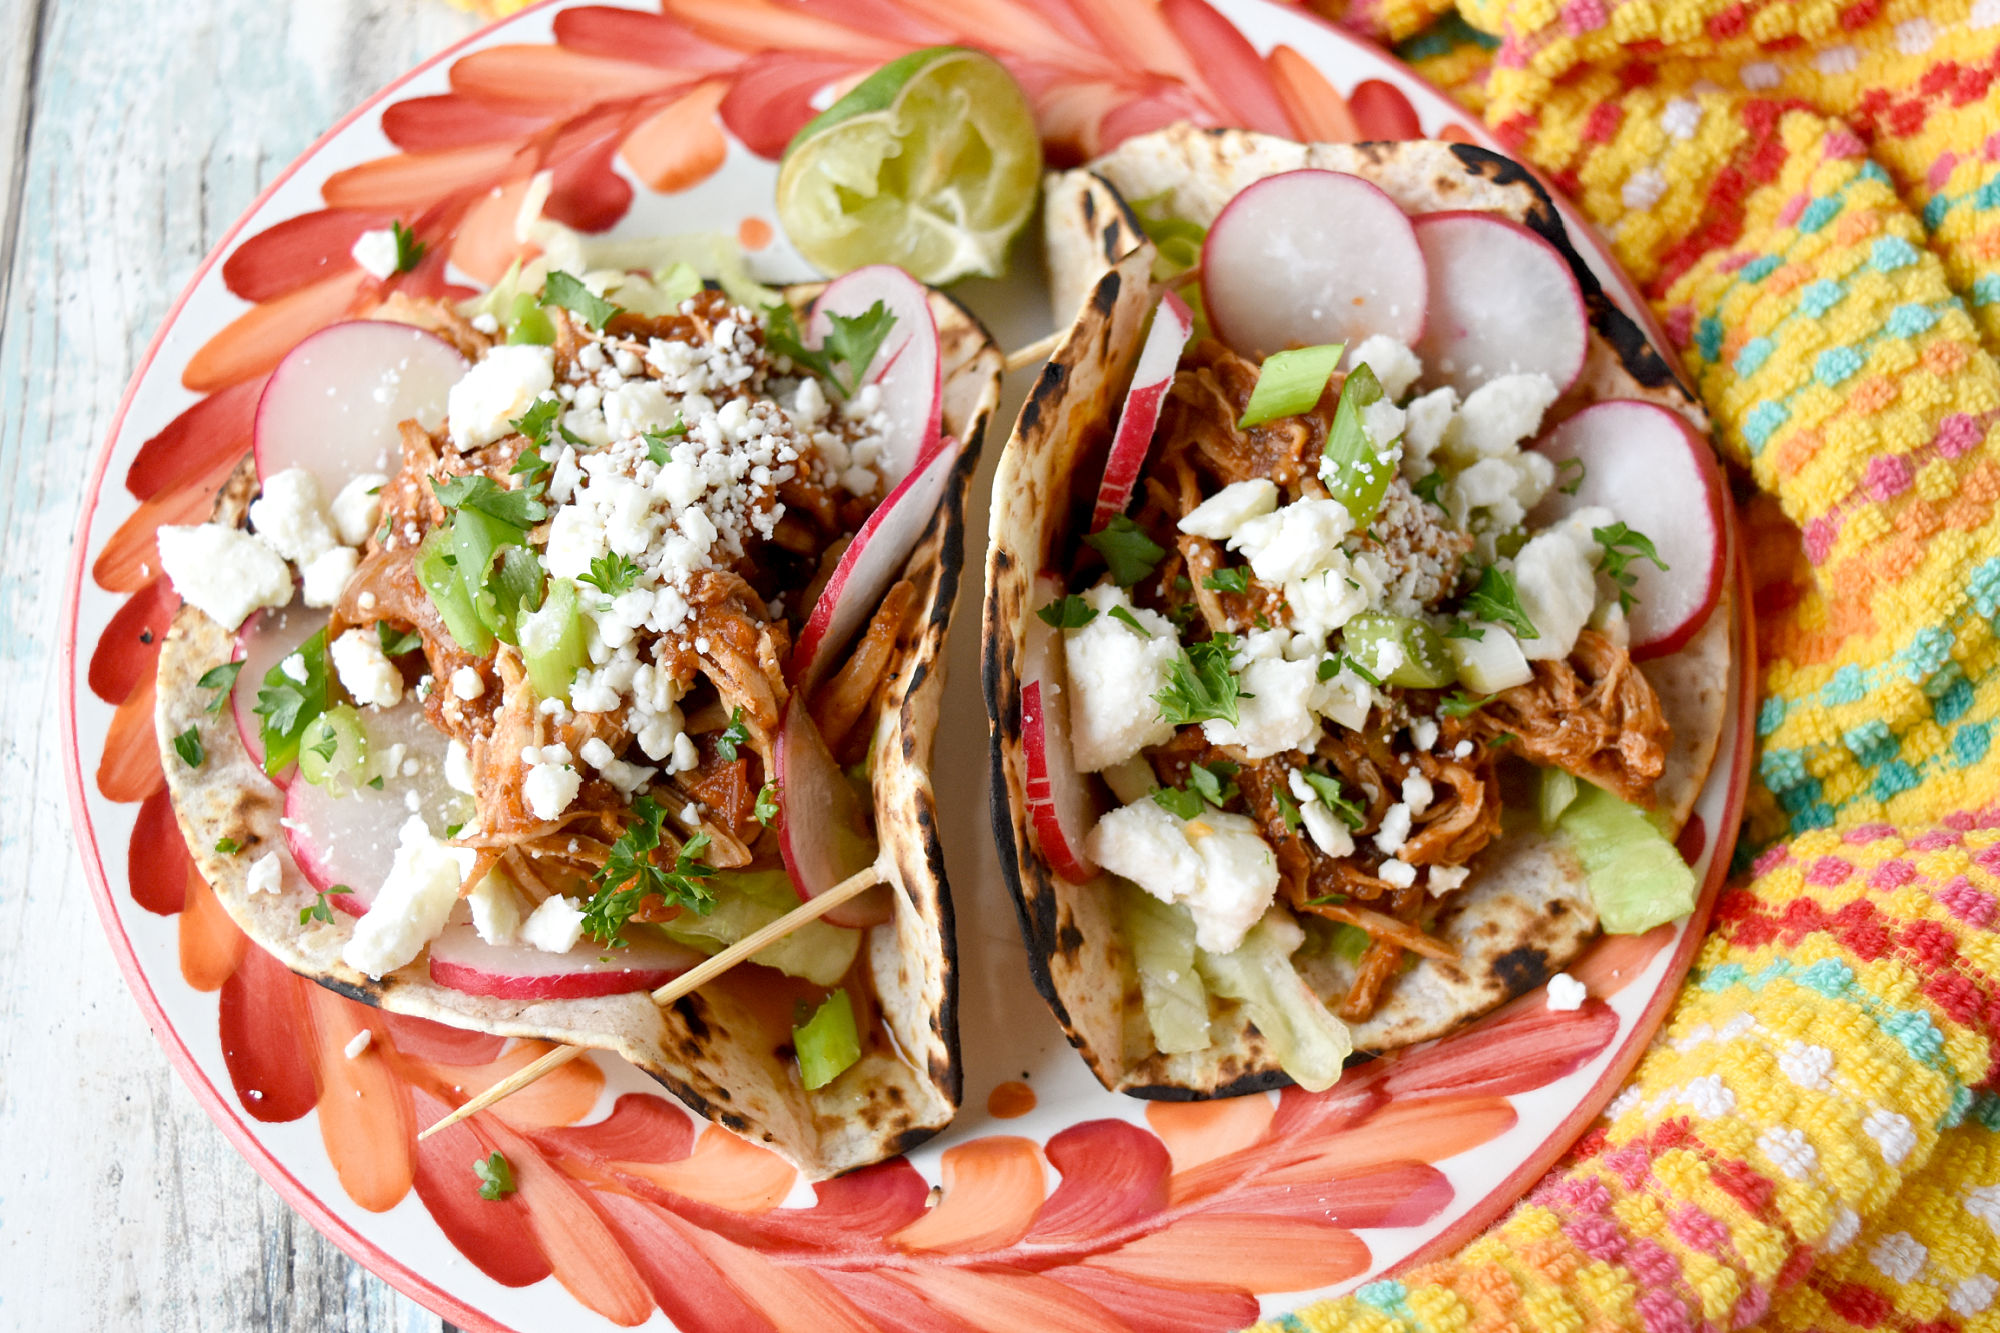 These Chicken Tinga Tacos cook up in the pressure cooker and taste like you traveled to Mexico. The chicken cooks in a chipotle tomato sauce packed with flavors. #OurFamilyTable #CincodeMayo #chickentinga #chickentacos #tingataco
